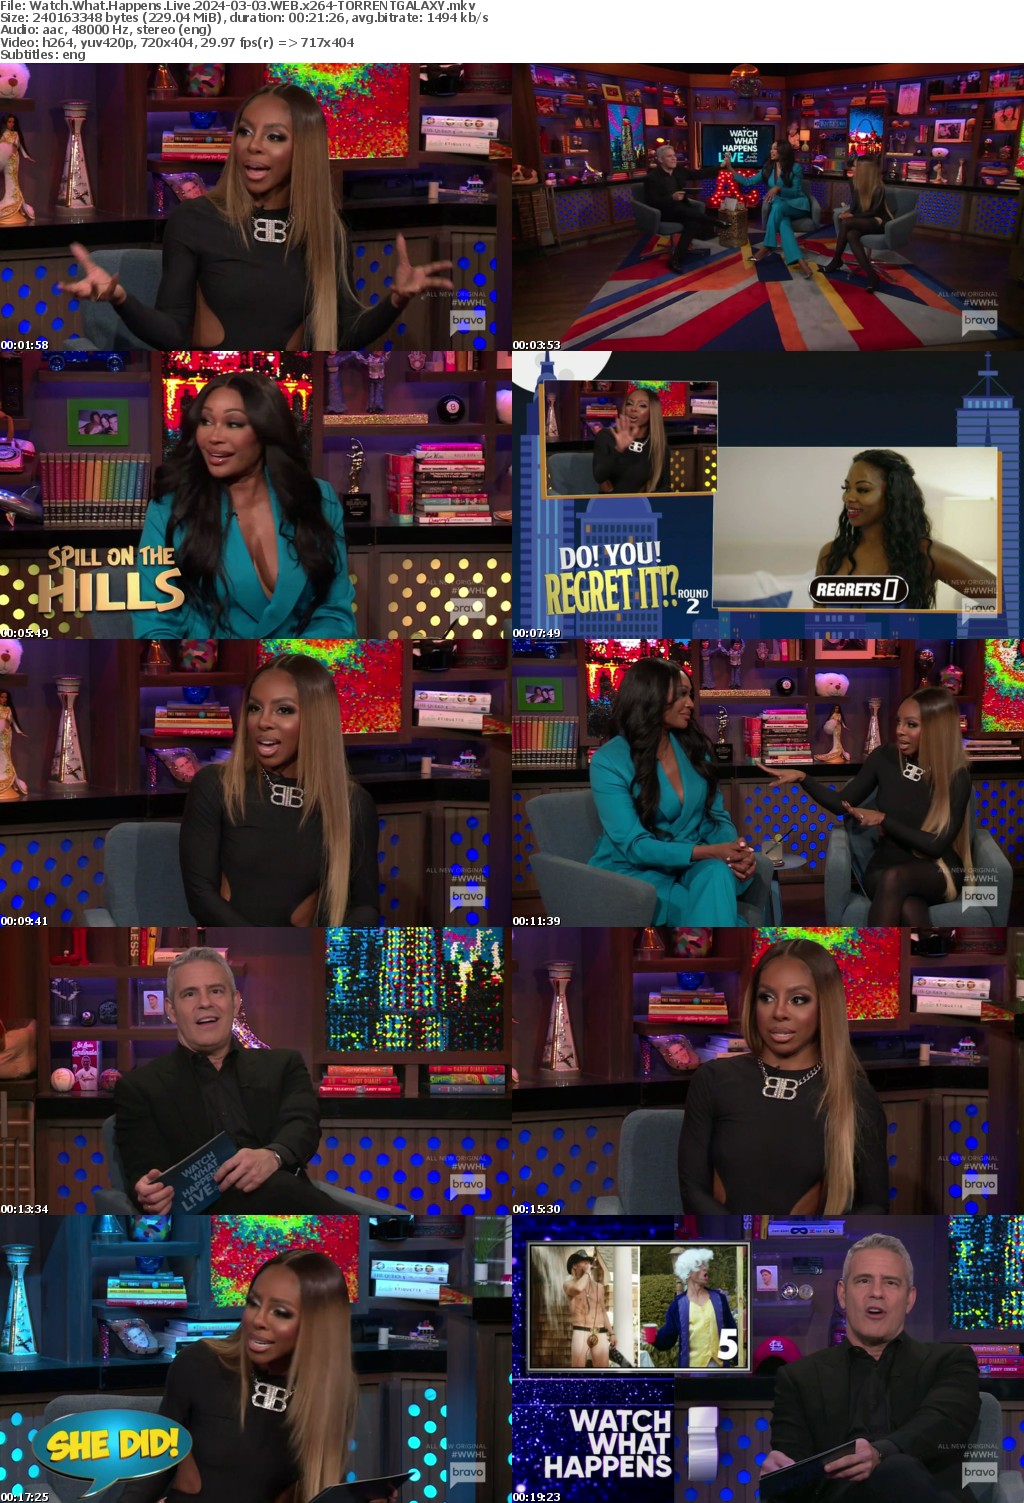 Watch What Happens Live 2024-03-03 WEB x264-GALAXY